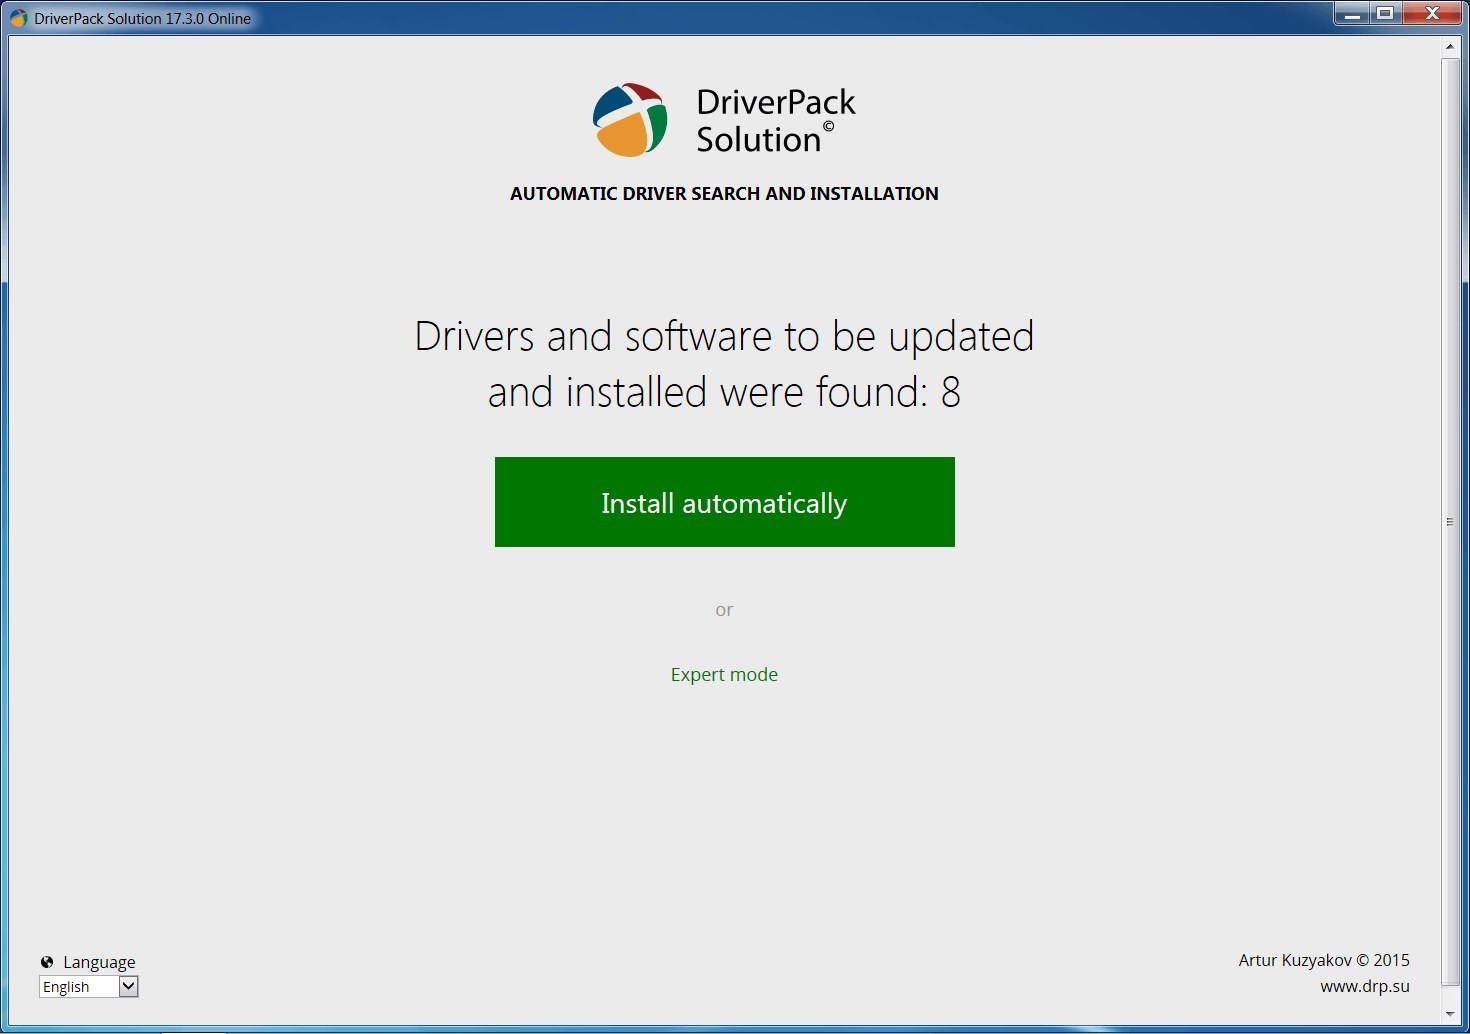 Driverpack solution iso